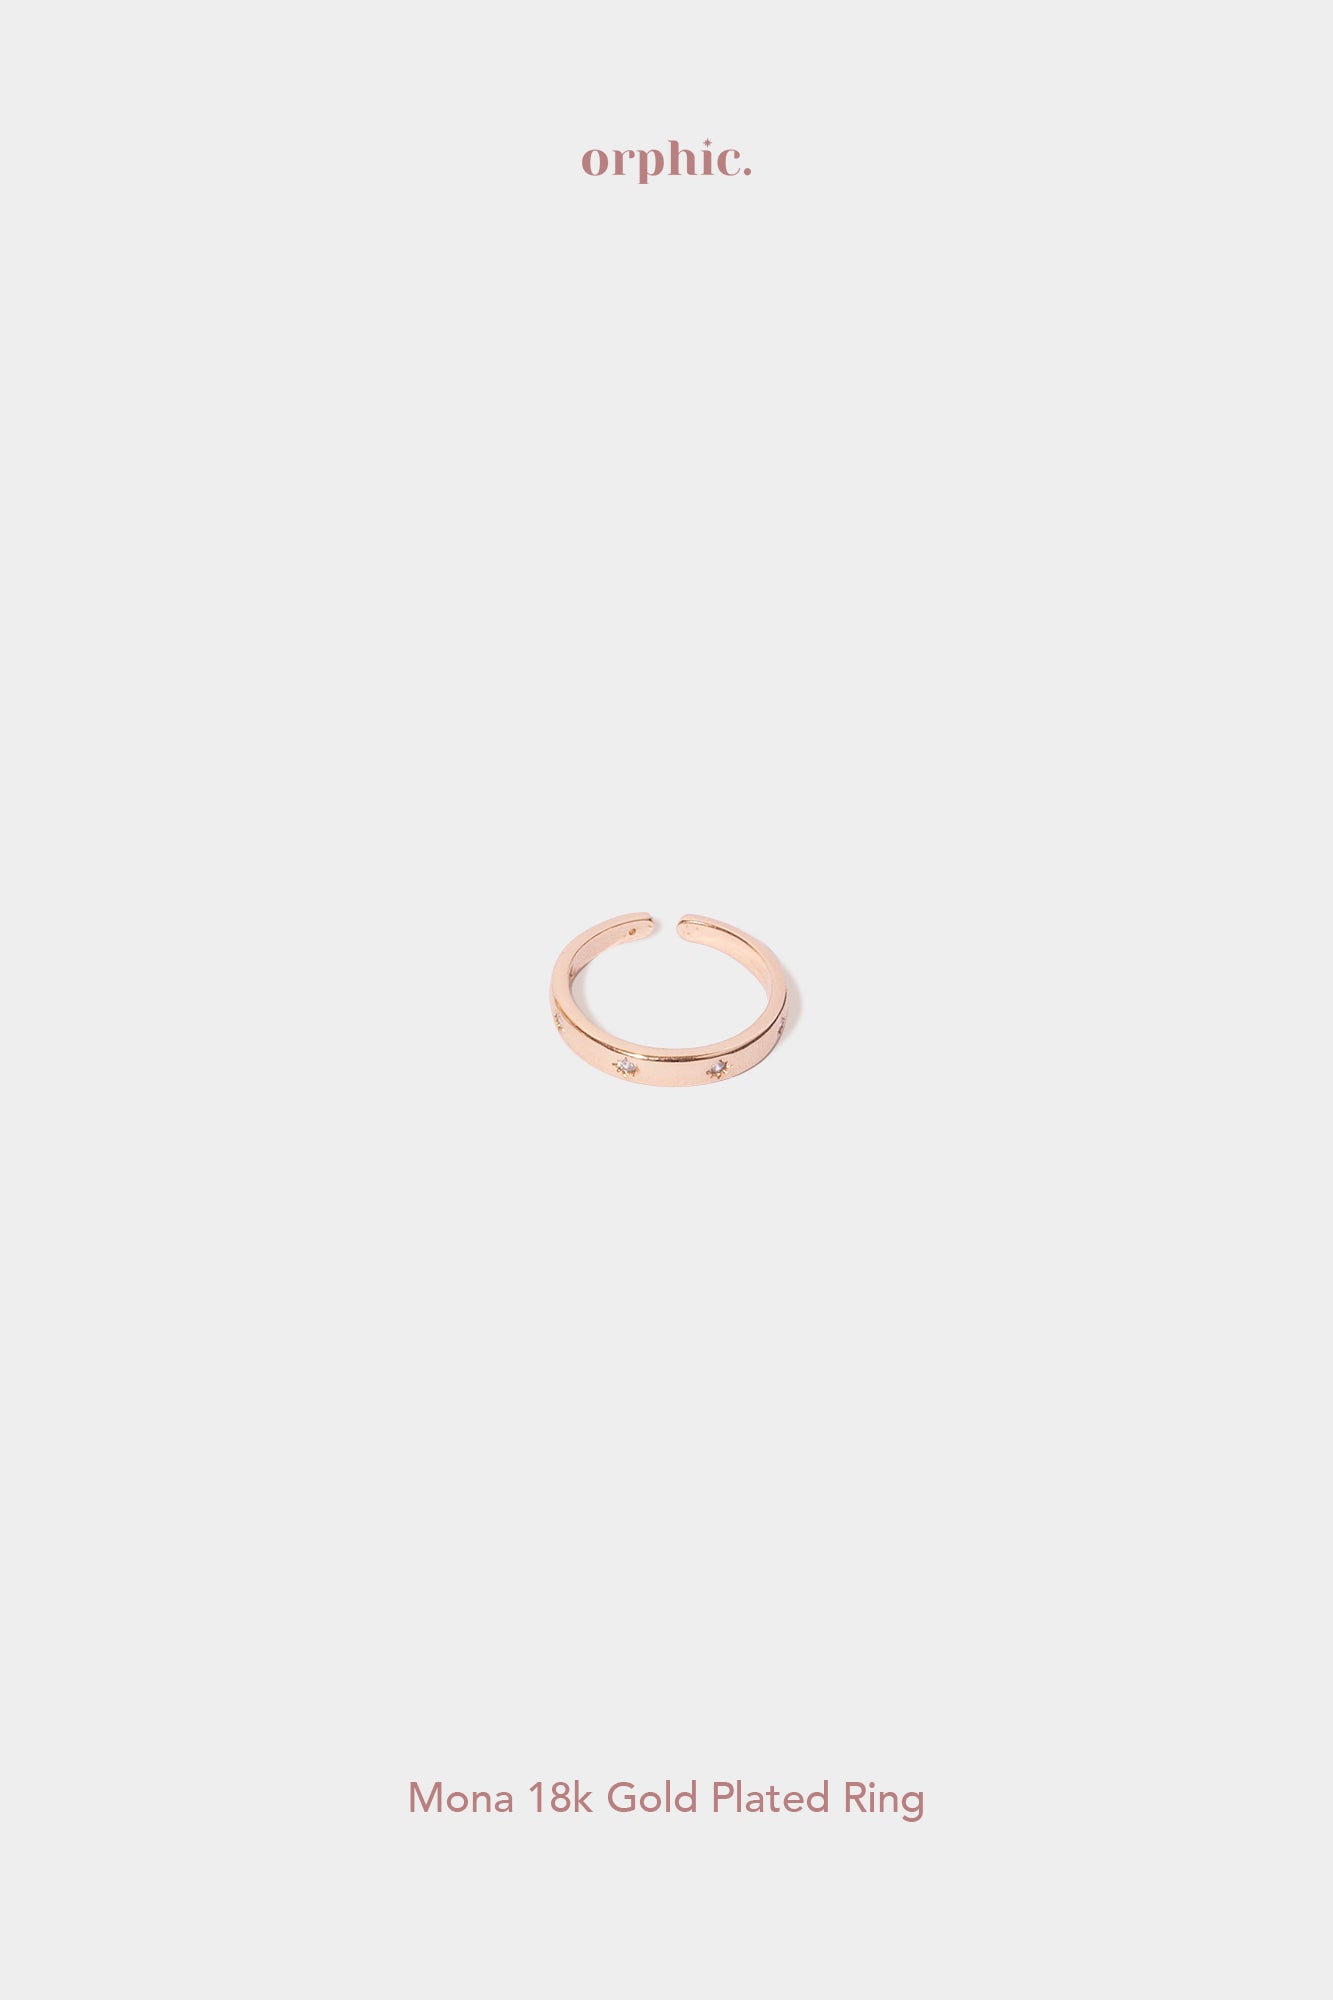 Mona 18k Gold Plated Ring